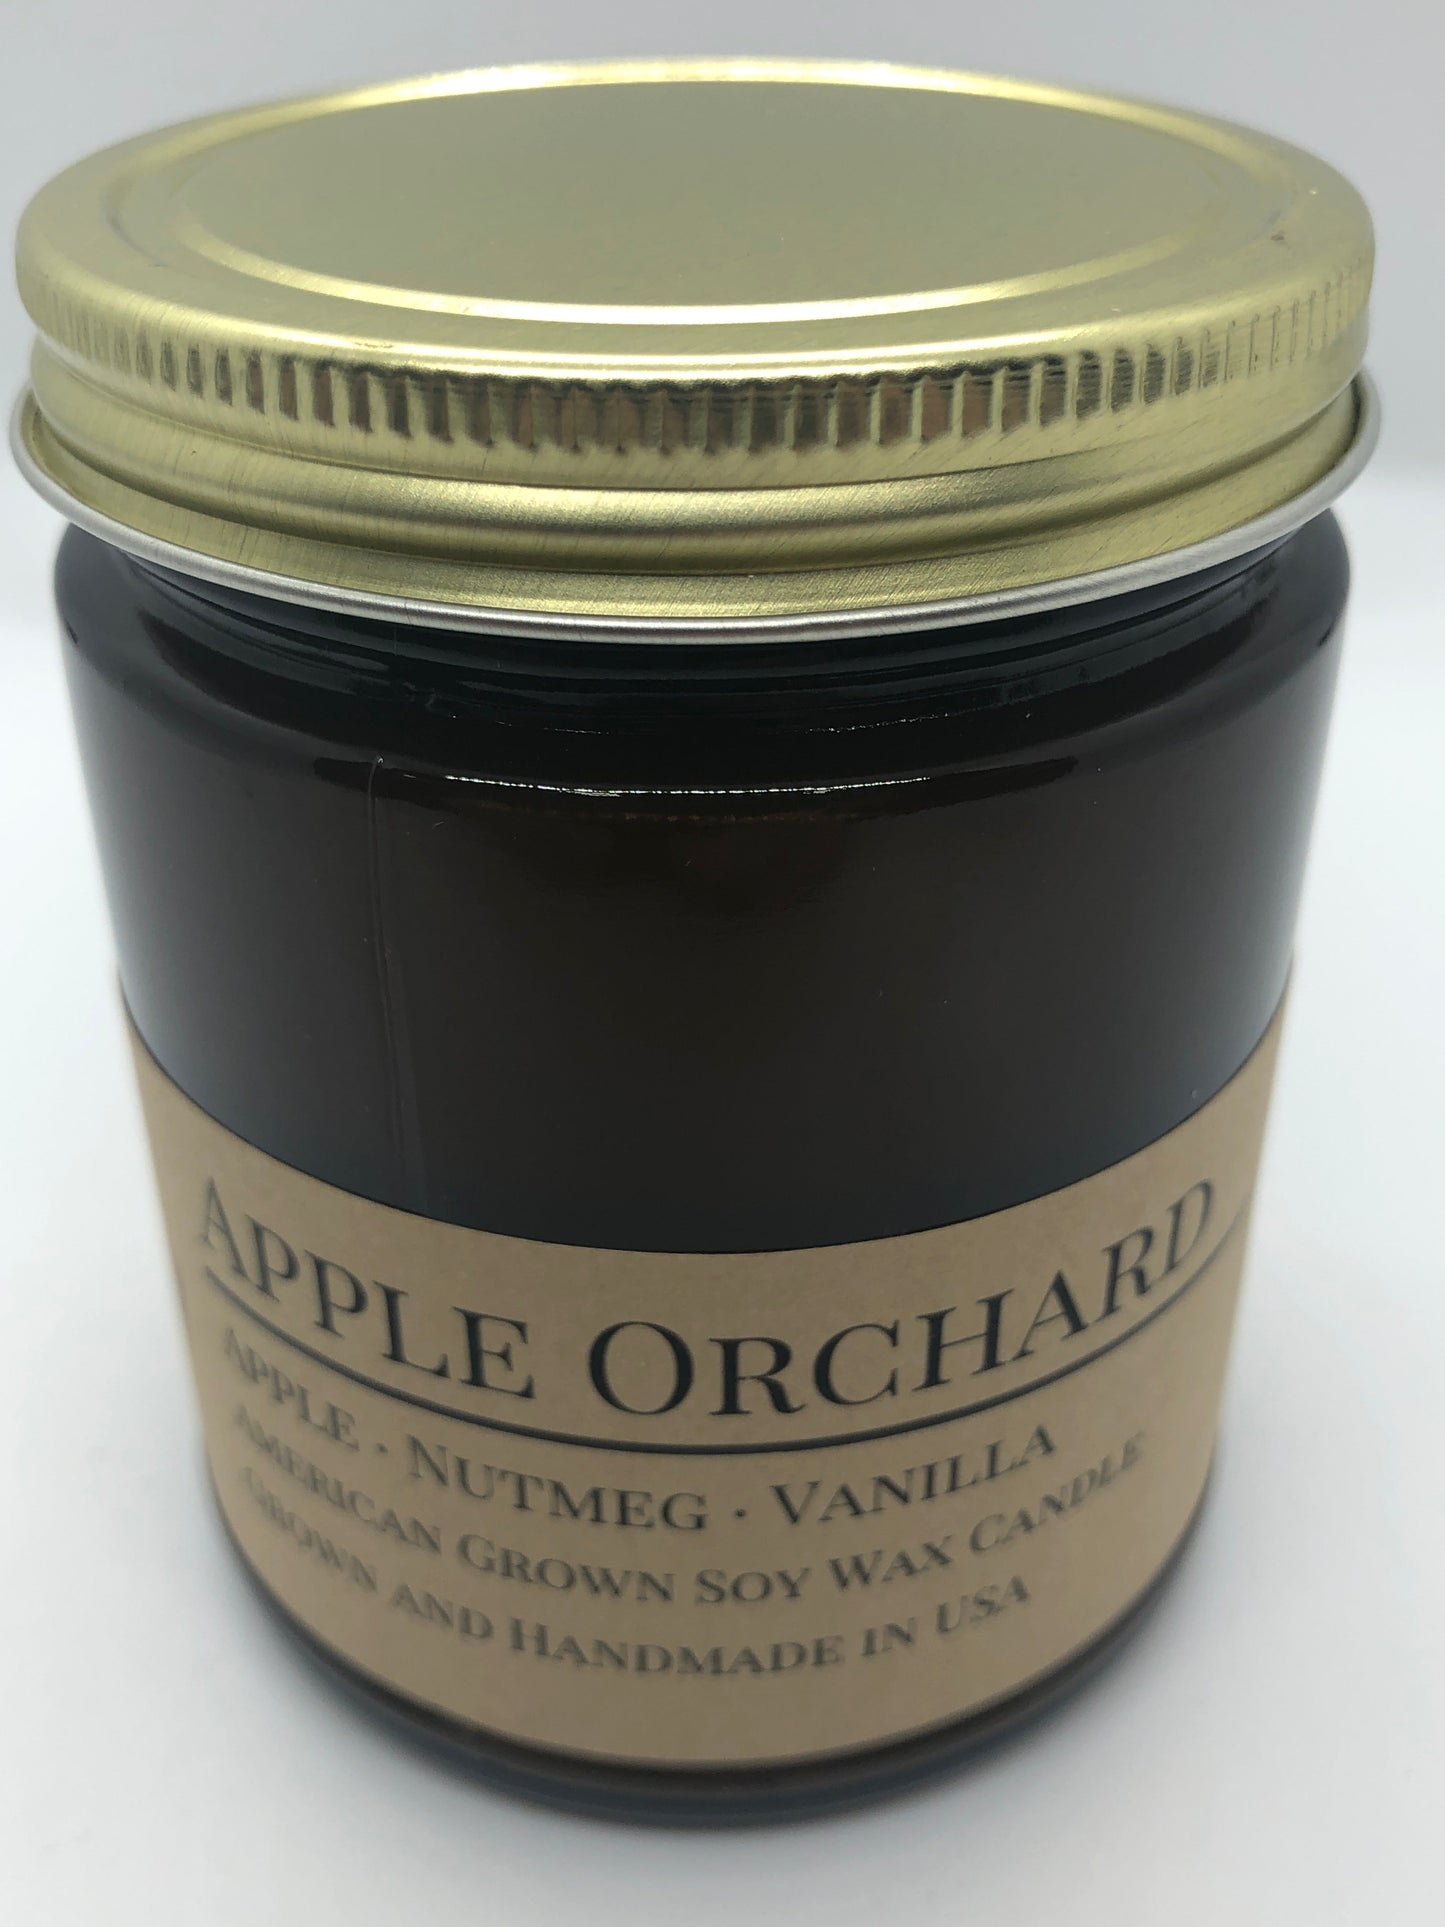 Apple Orchard Soy Candle | 9 oz Amber Apothecary Jar